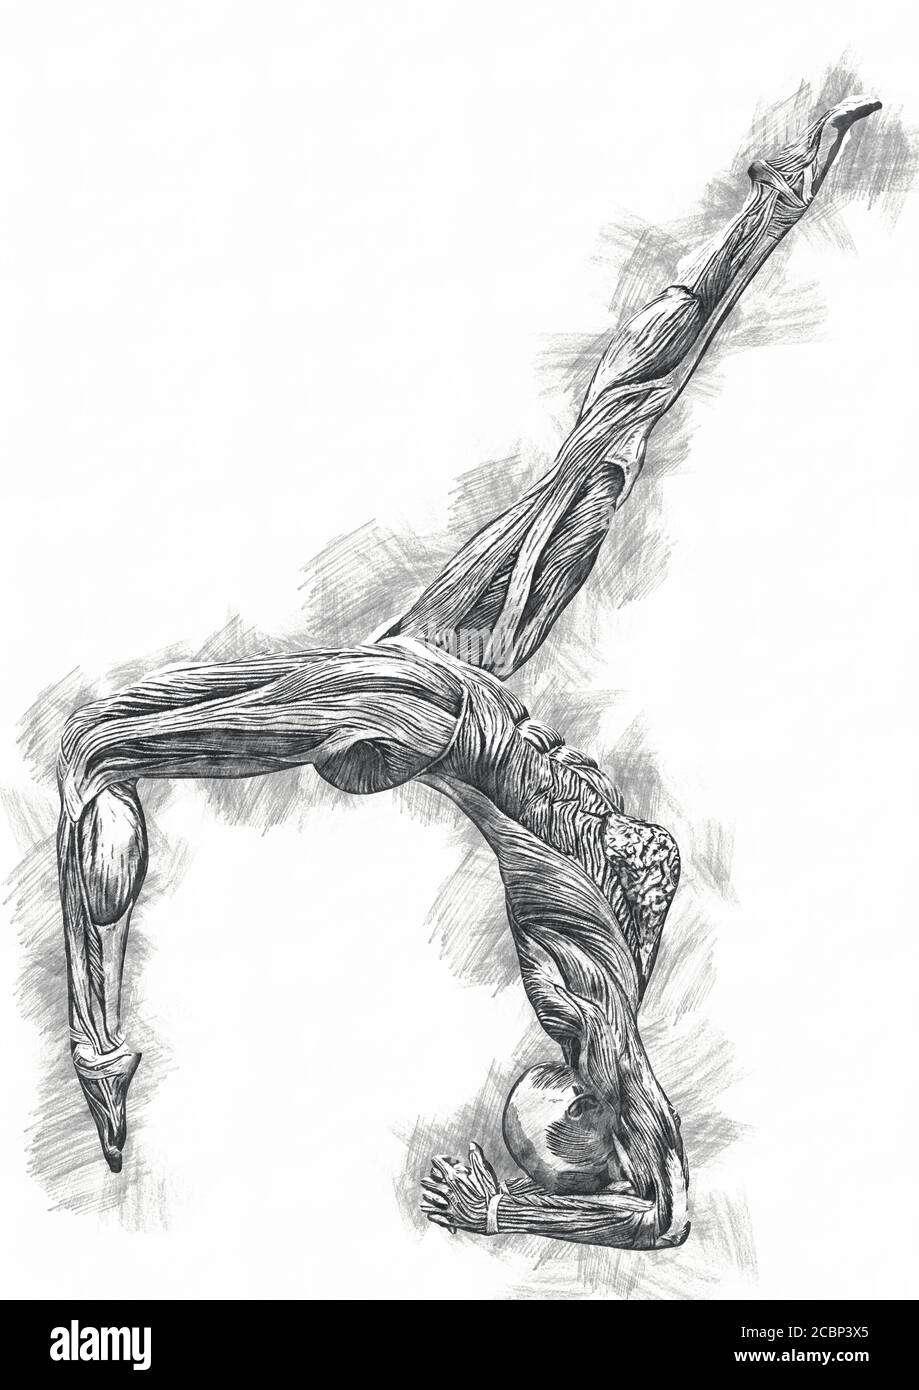 muscle woman doing a scorpion with crow variation pose in sketcher style, 3d illustration Stock Photo